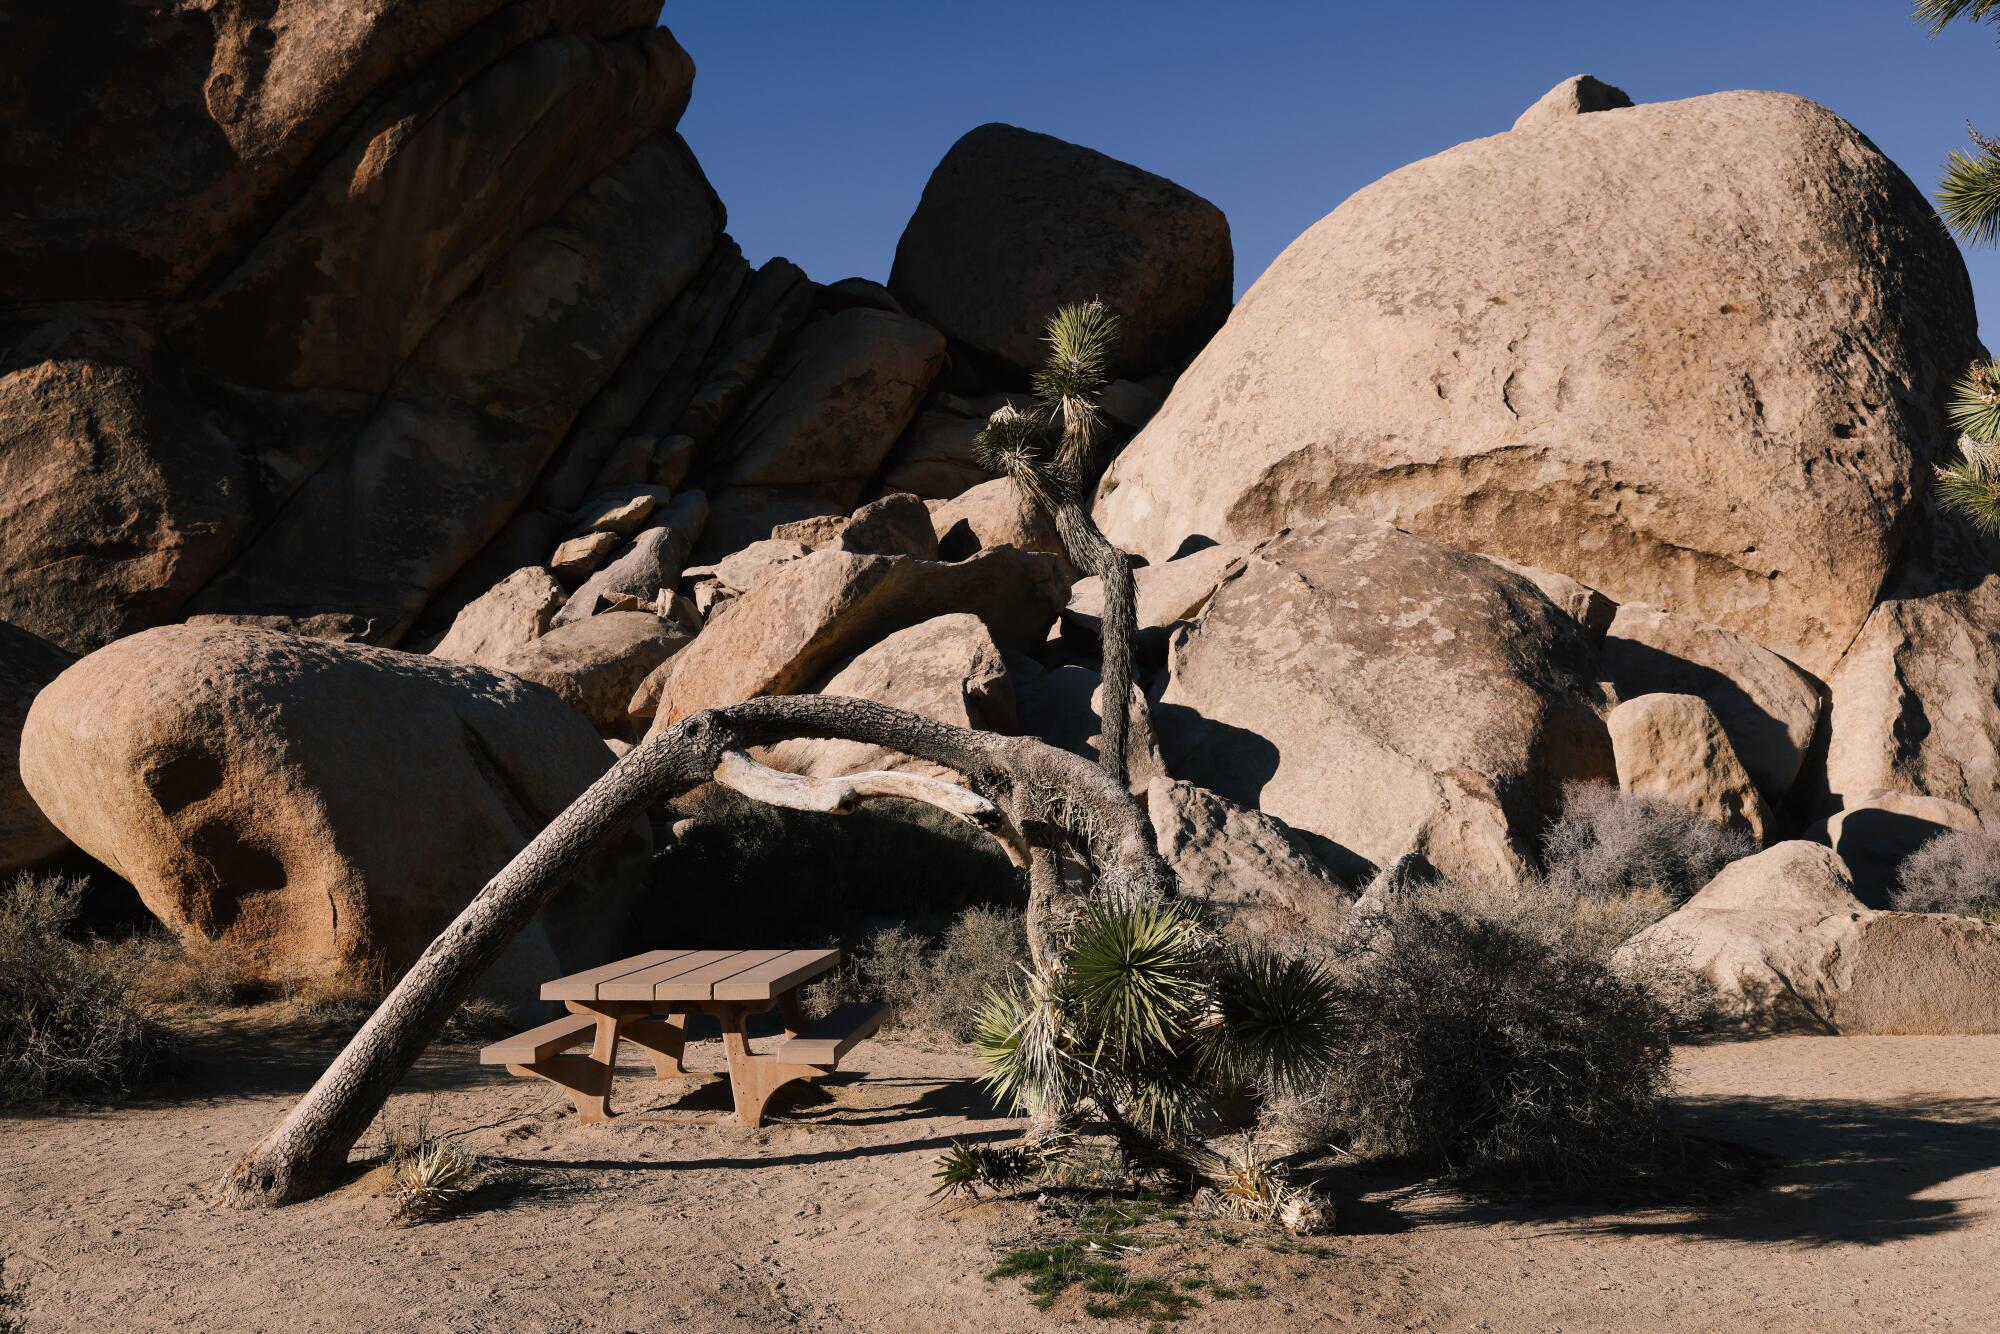 Fans of rock star Gram Parsons have consistently visited Cap Rock at Joshua Tree.